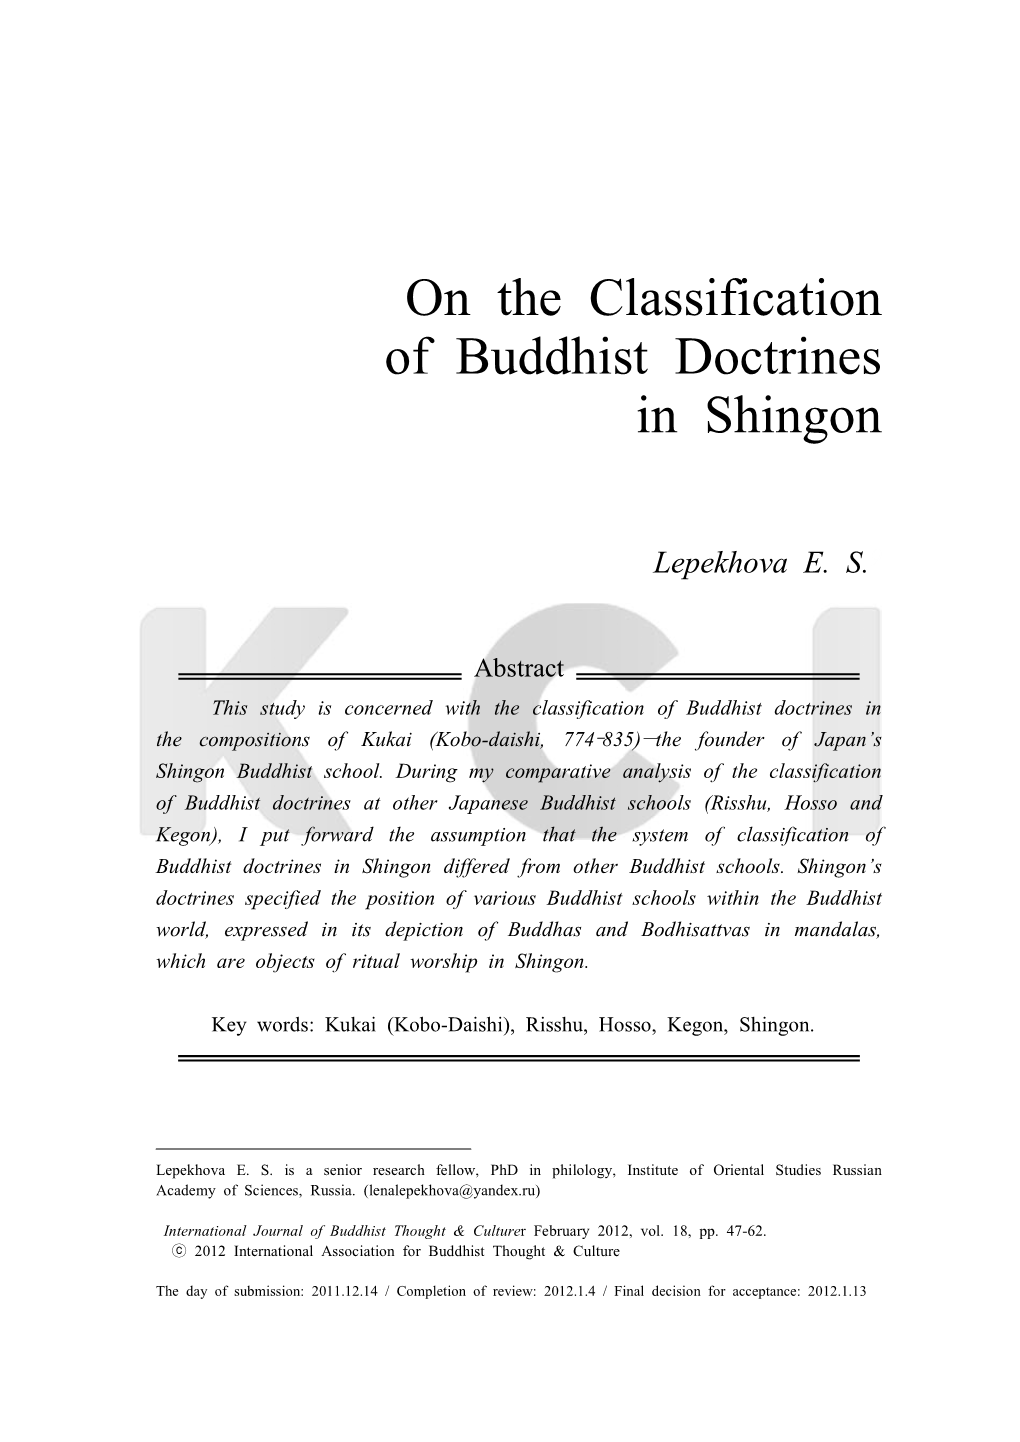 On the Classification of Buddhist Doctrines in Shingon